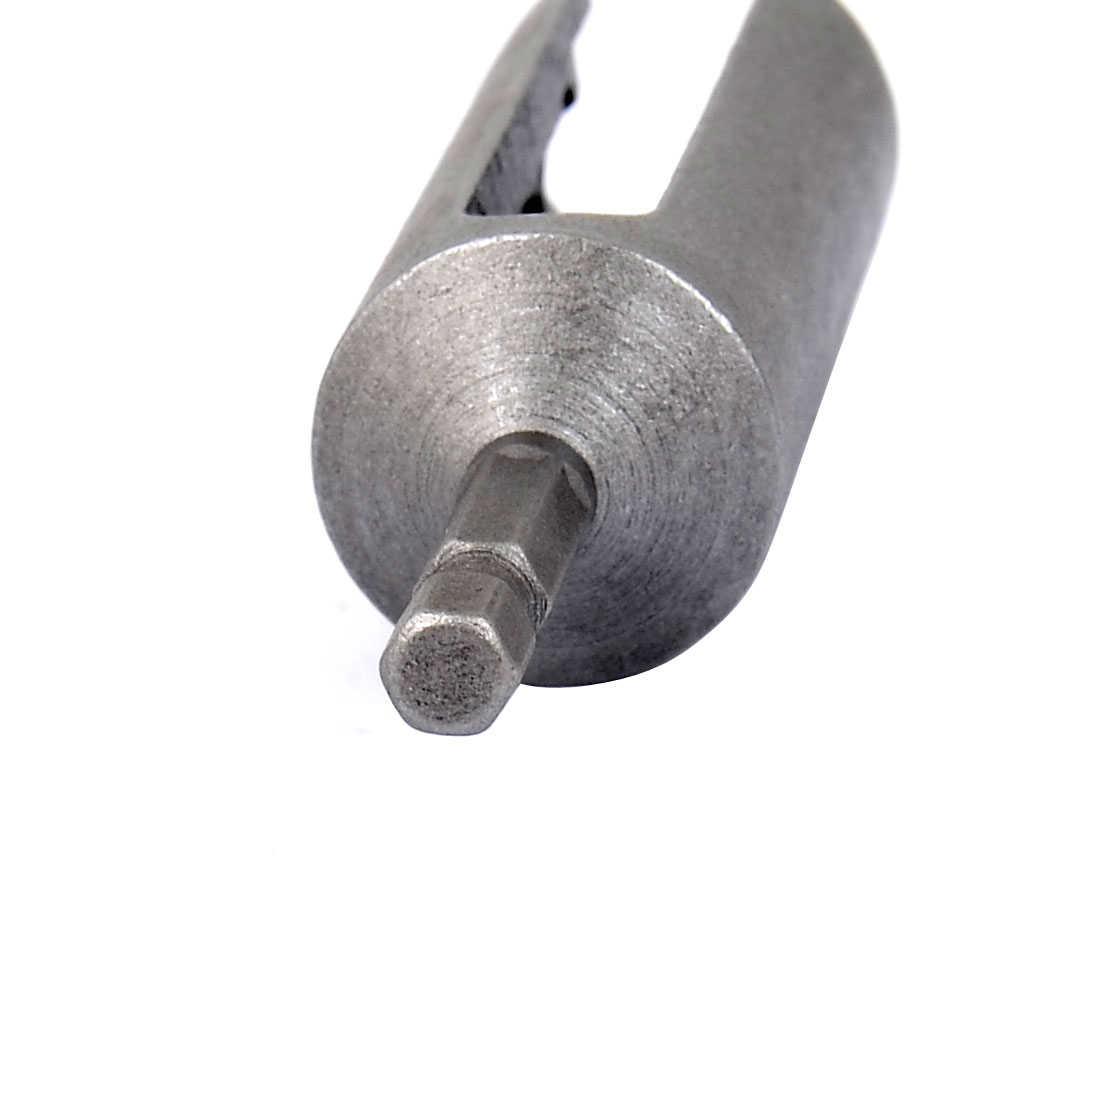 17mm Hex Socket Slotted Extension Driver Bit Adapter Tool 120mm Length